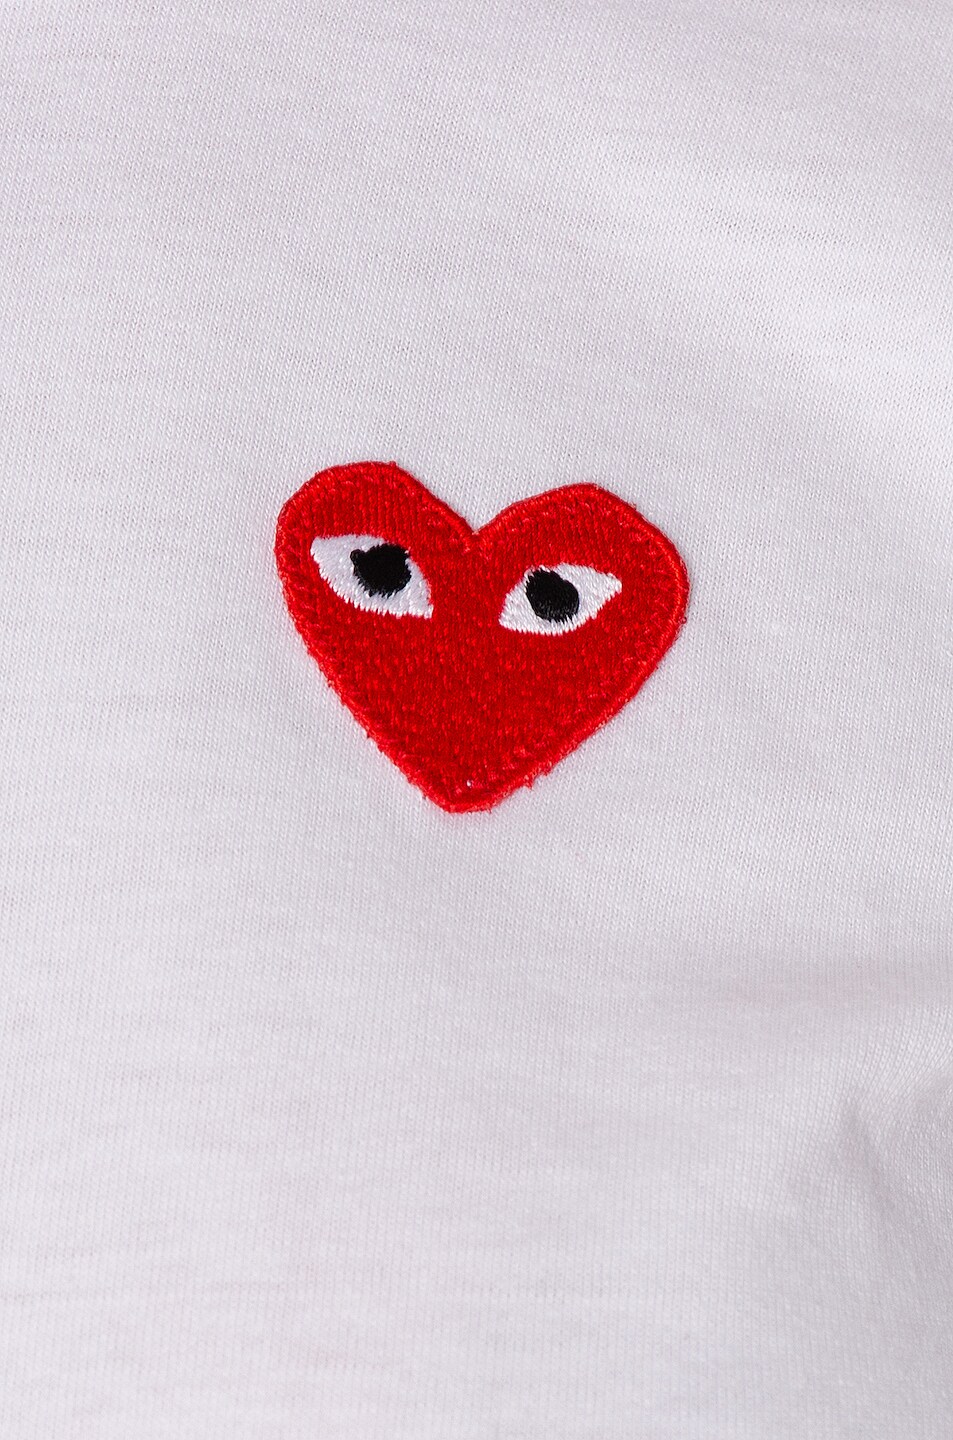 Comme Des Garcons PLAY Cotton Red Emblem Tee in White | FWRD